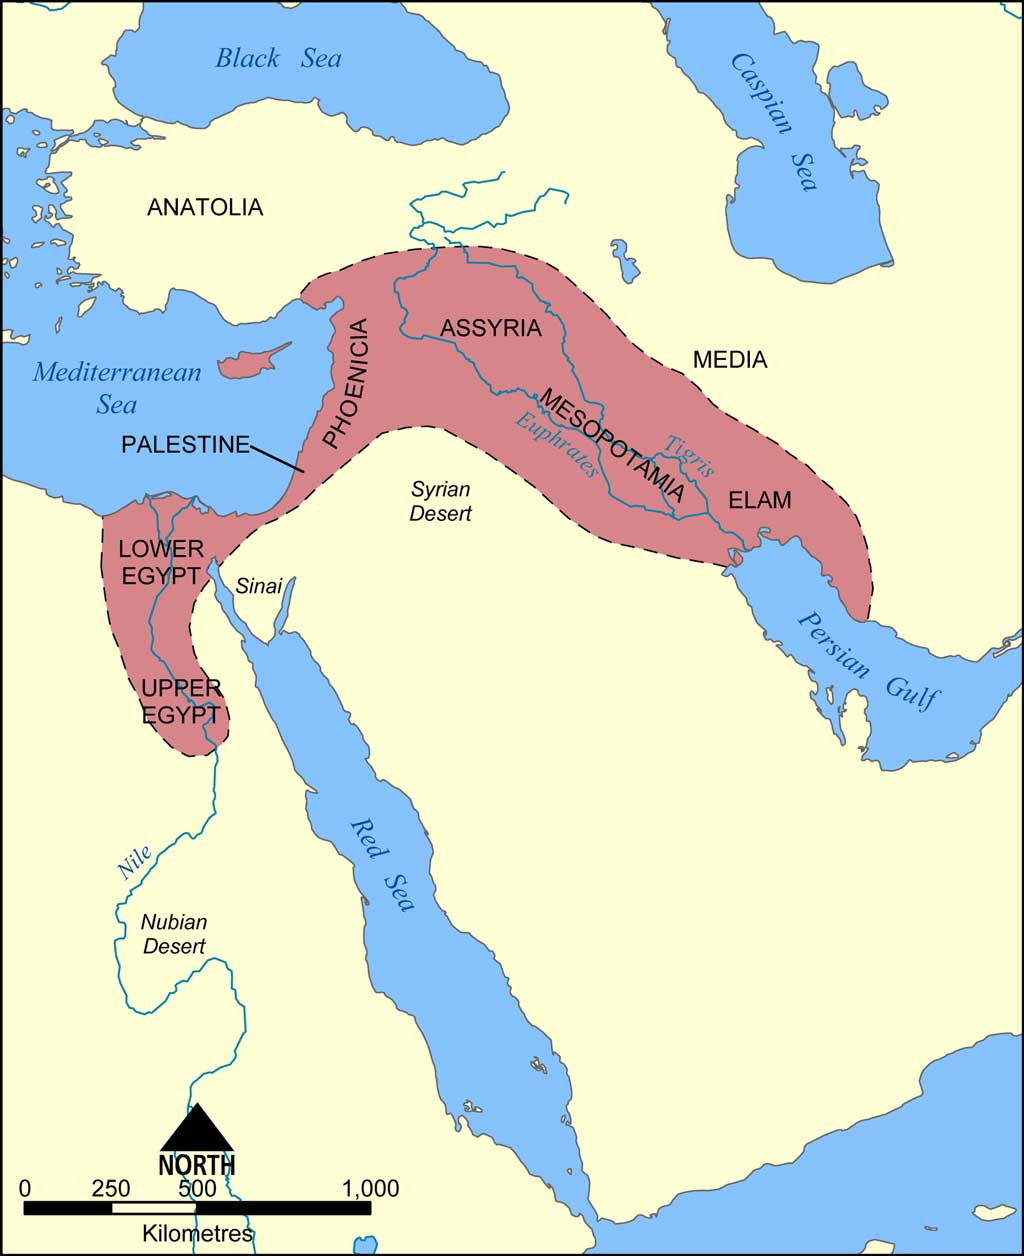 Map of the Fertile Crescent. The red zone on the map illustrates that the Fertile Crescent stretched along the Tigris and Euphrates Rivers and into Egypt.